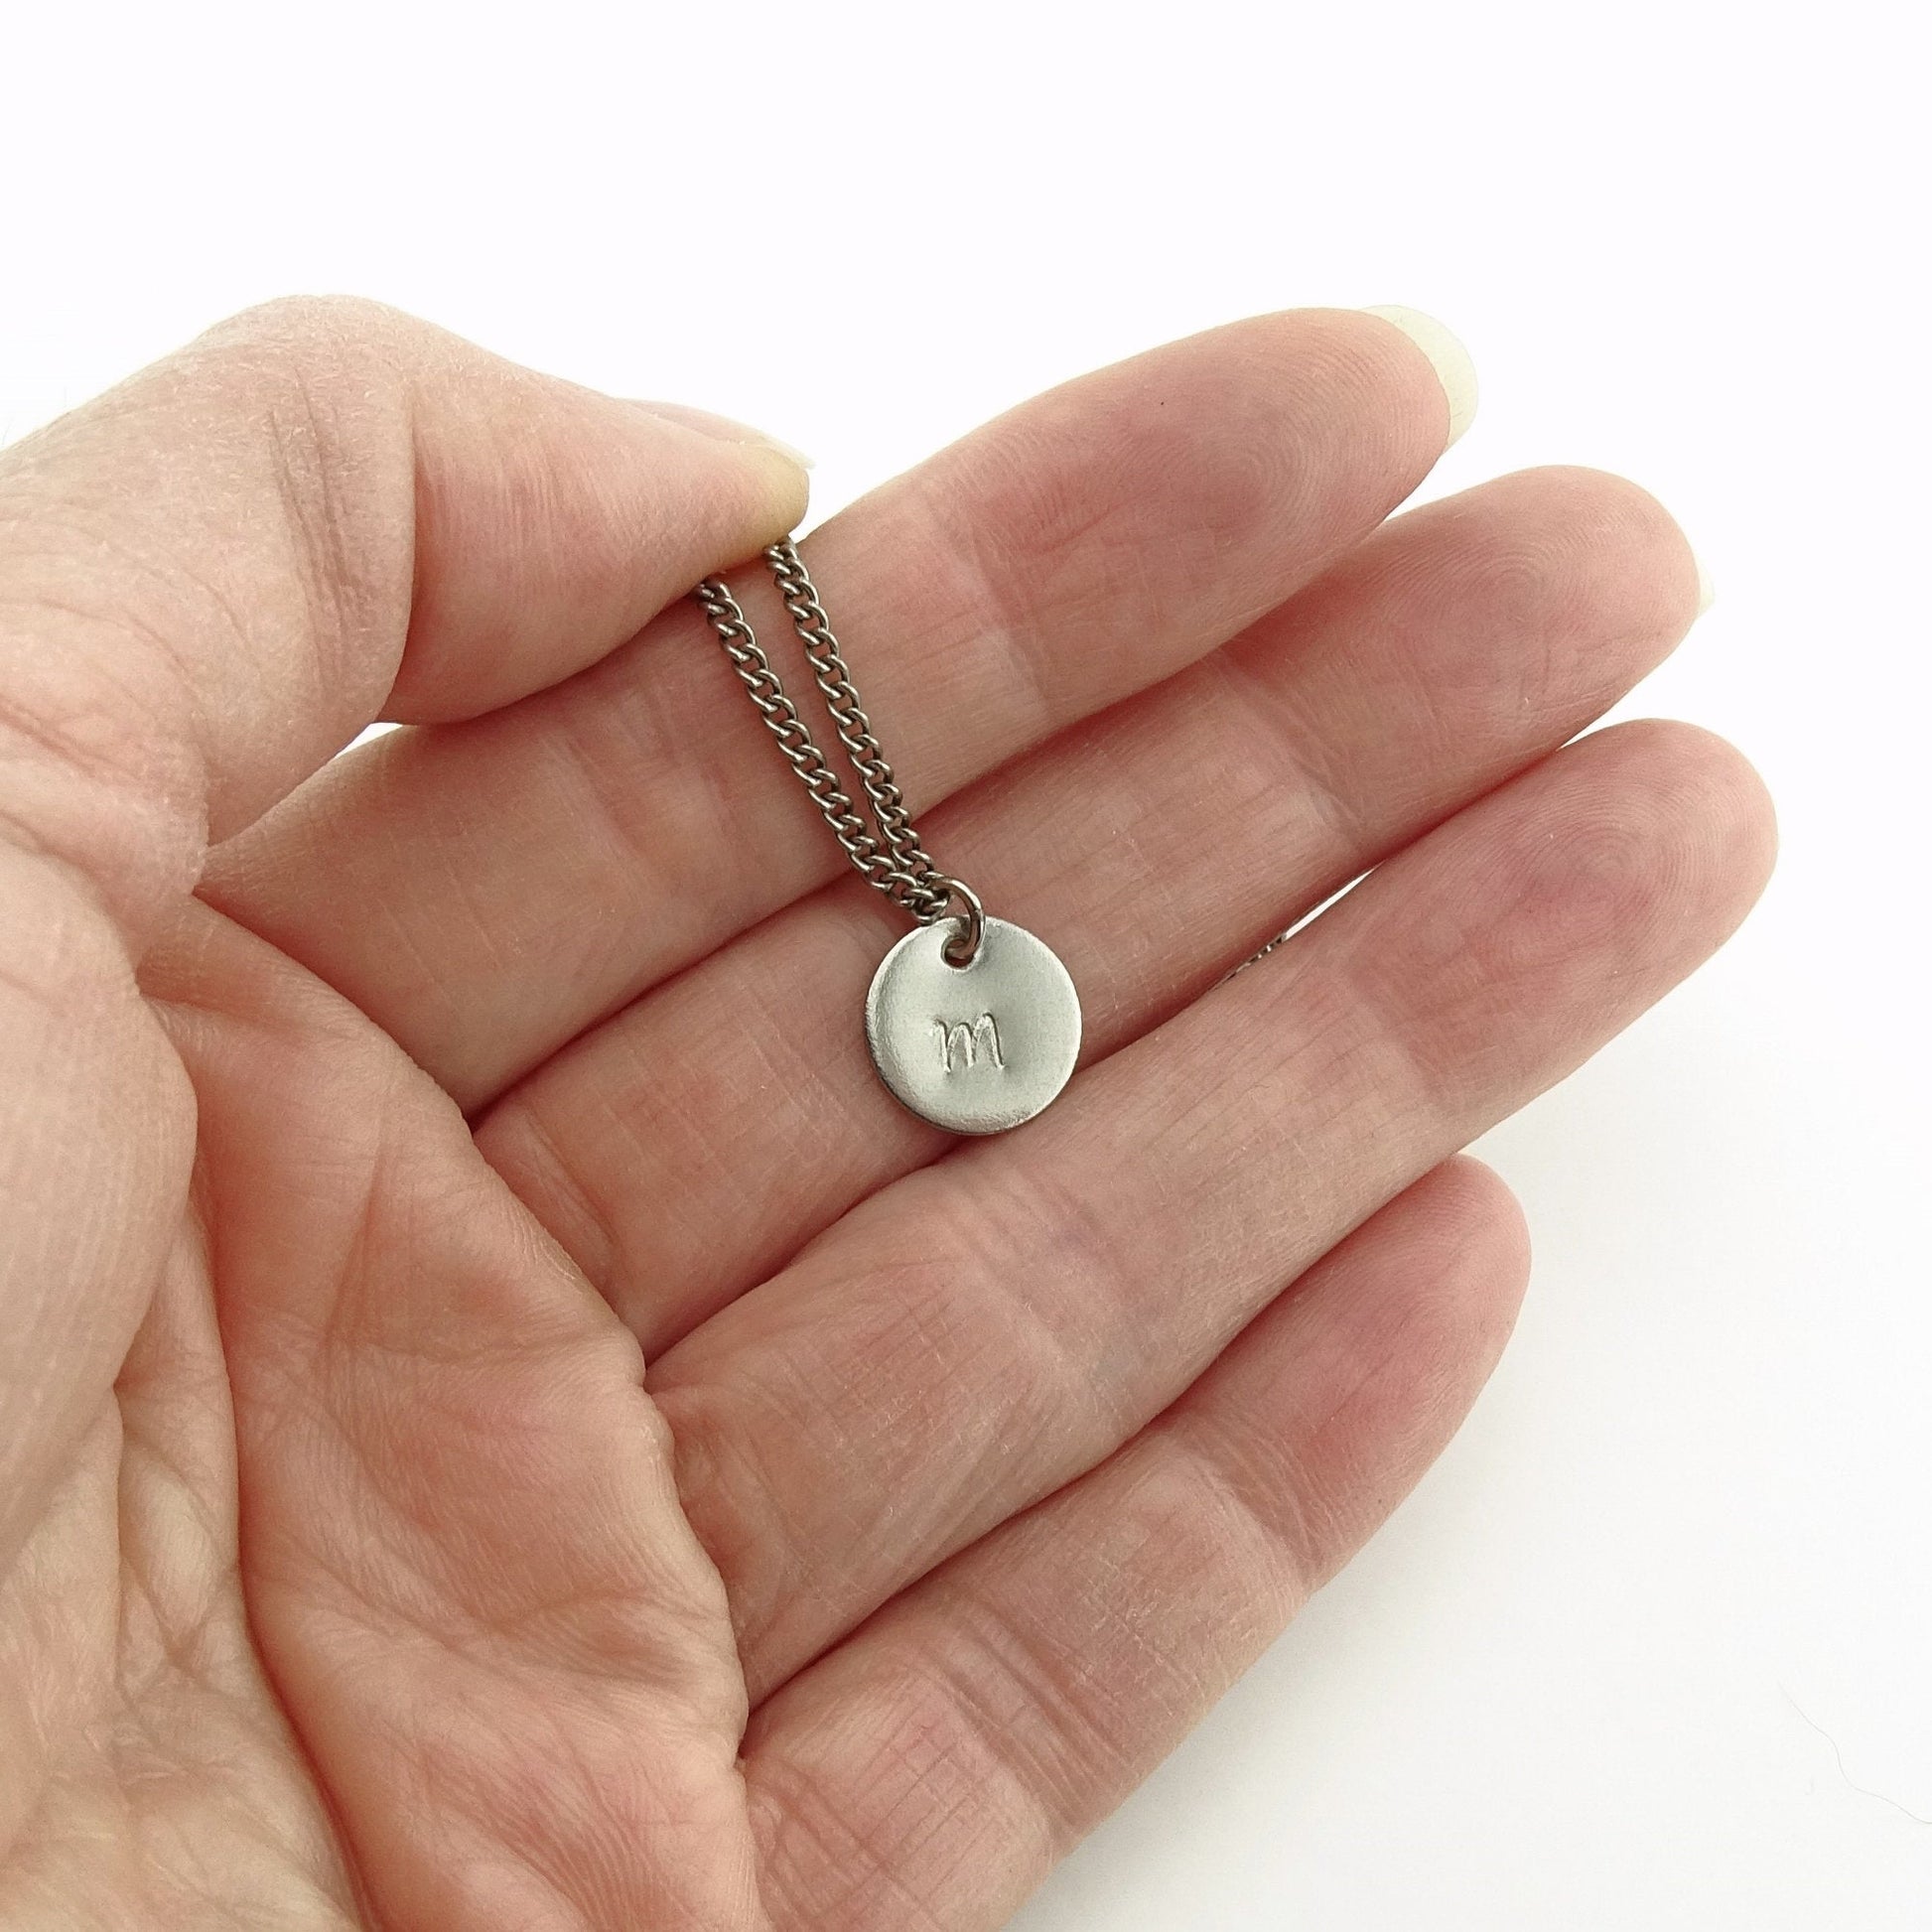 MADE WITH LOVE charms, 11mm nickel free pendants for jewelry making